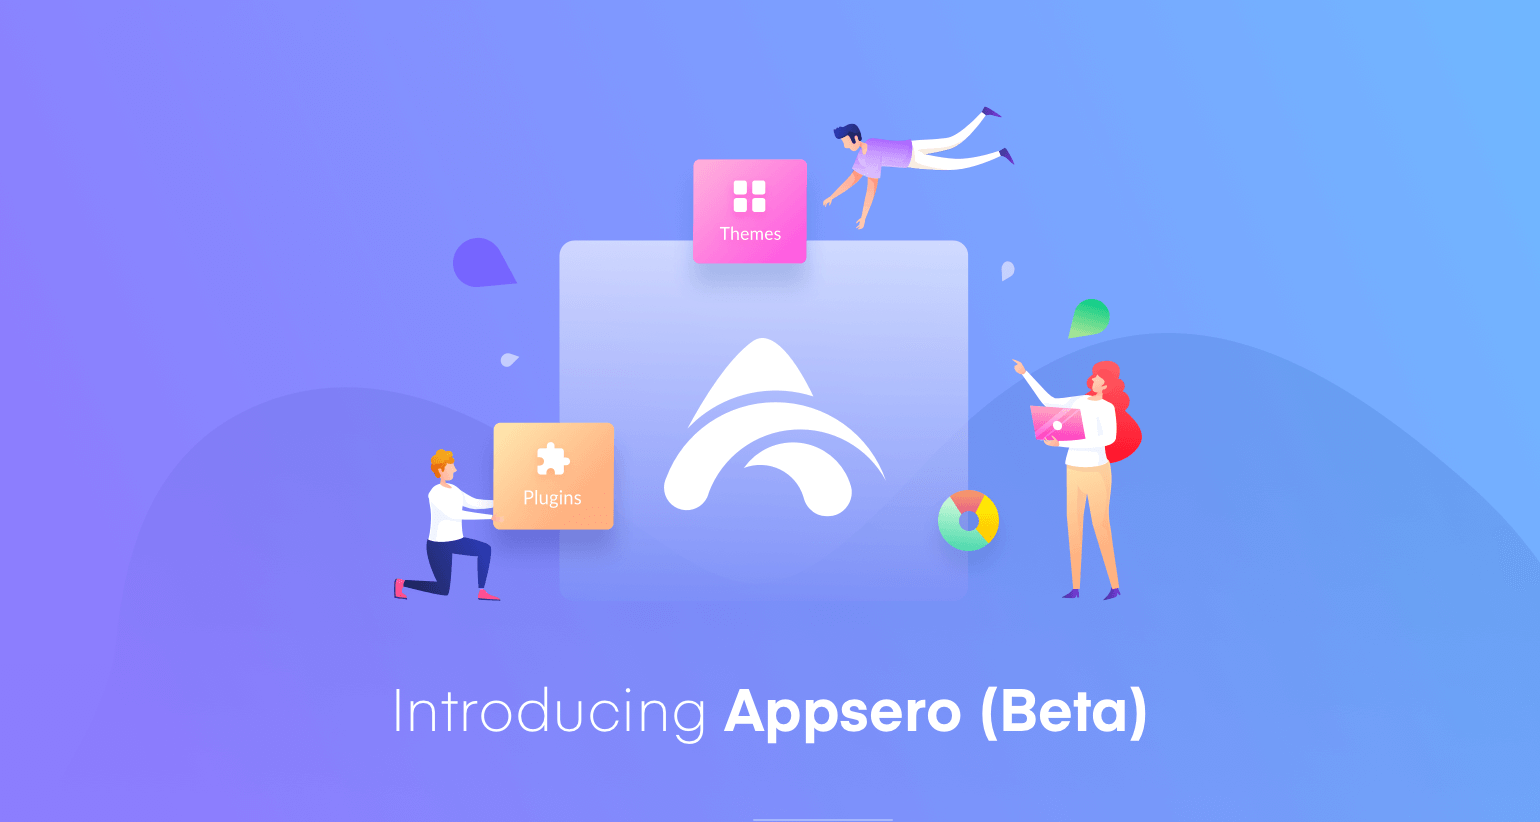 Introducing Appsero: An All in One Solution for WordPress Developers that Doesn't Break The Bank! 1